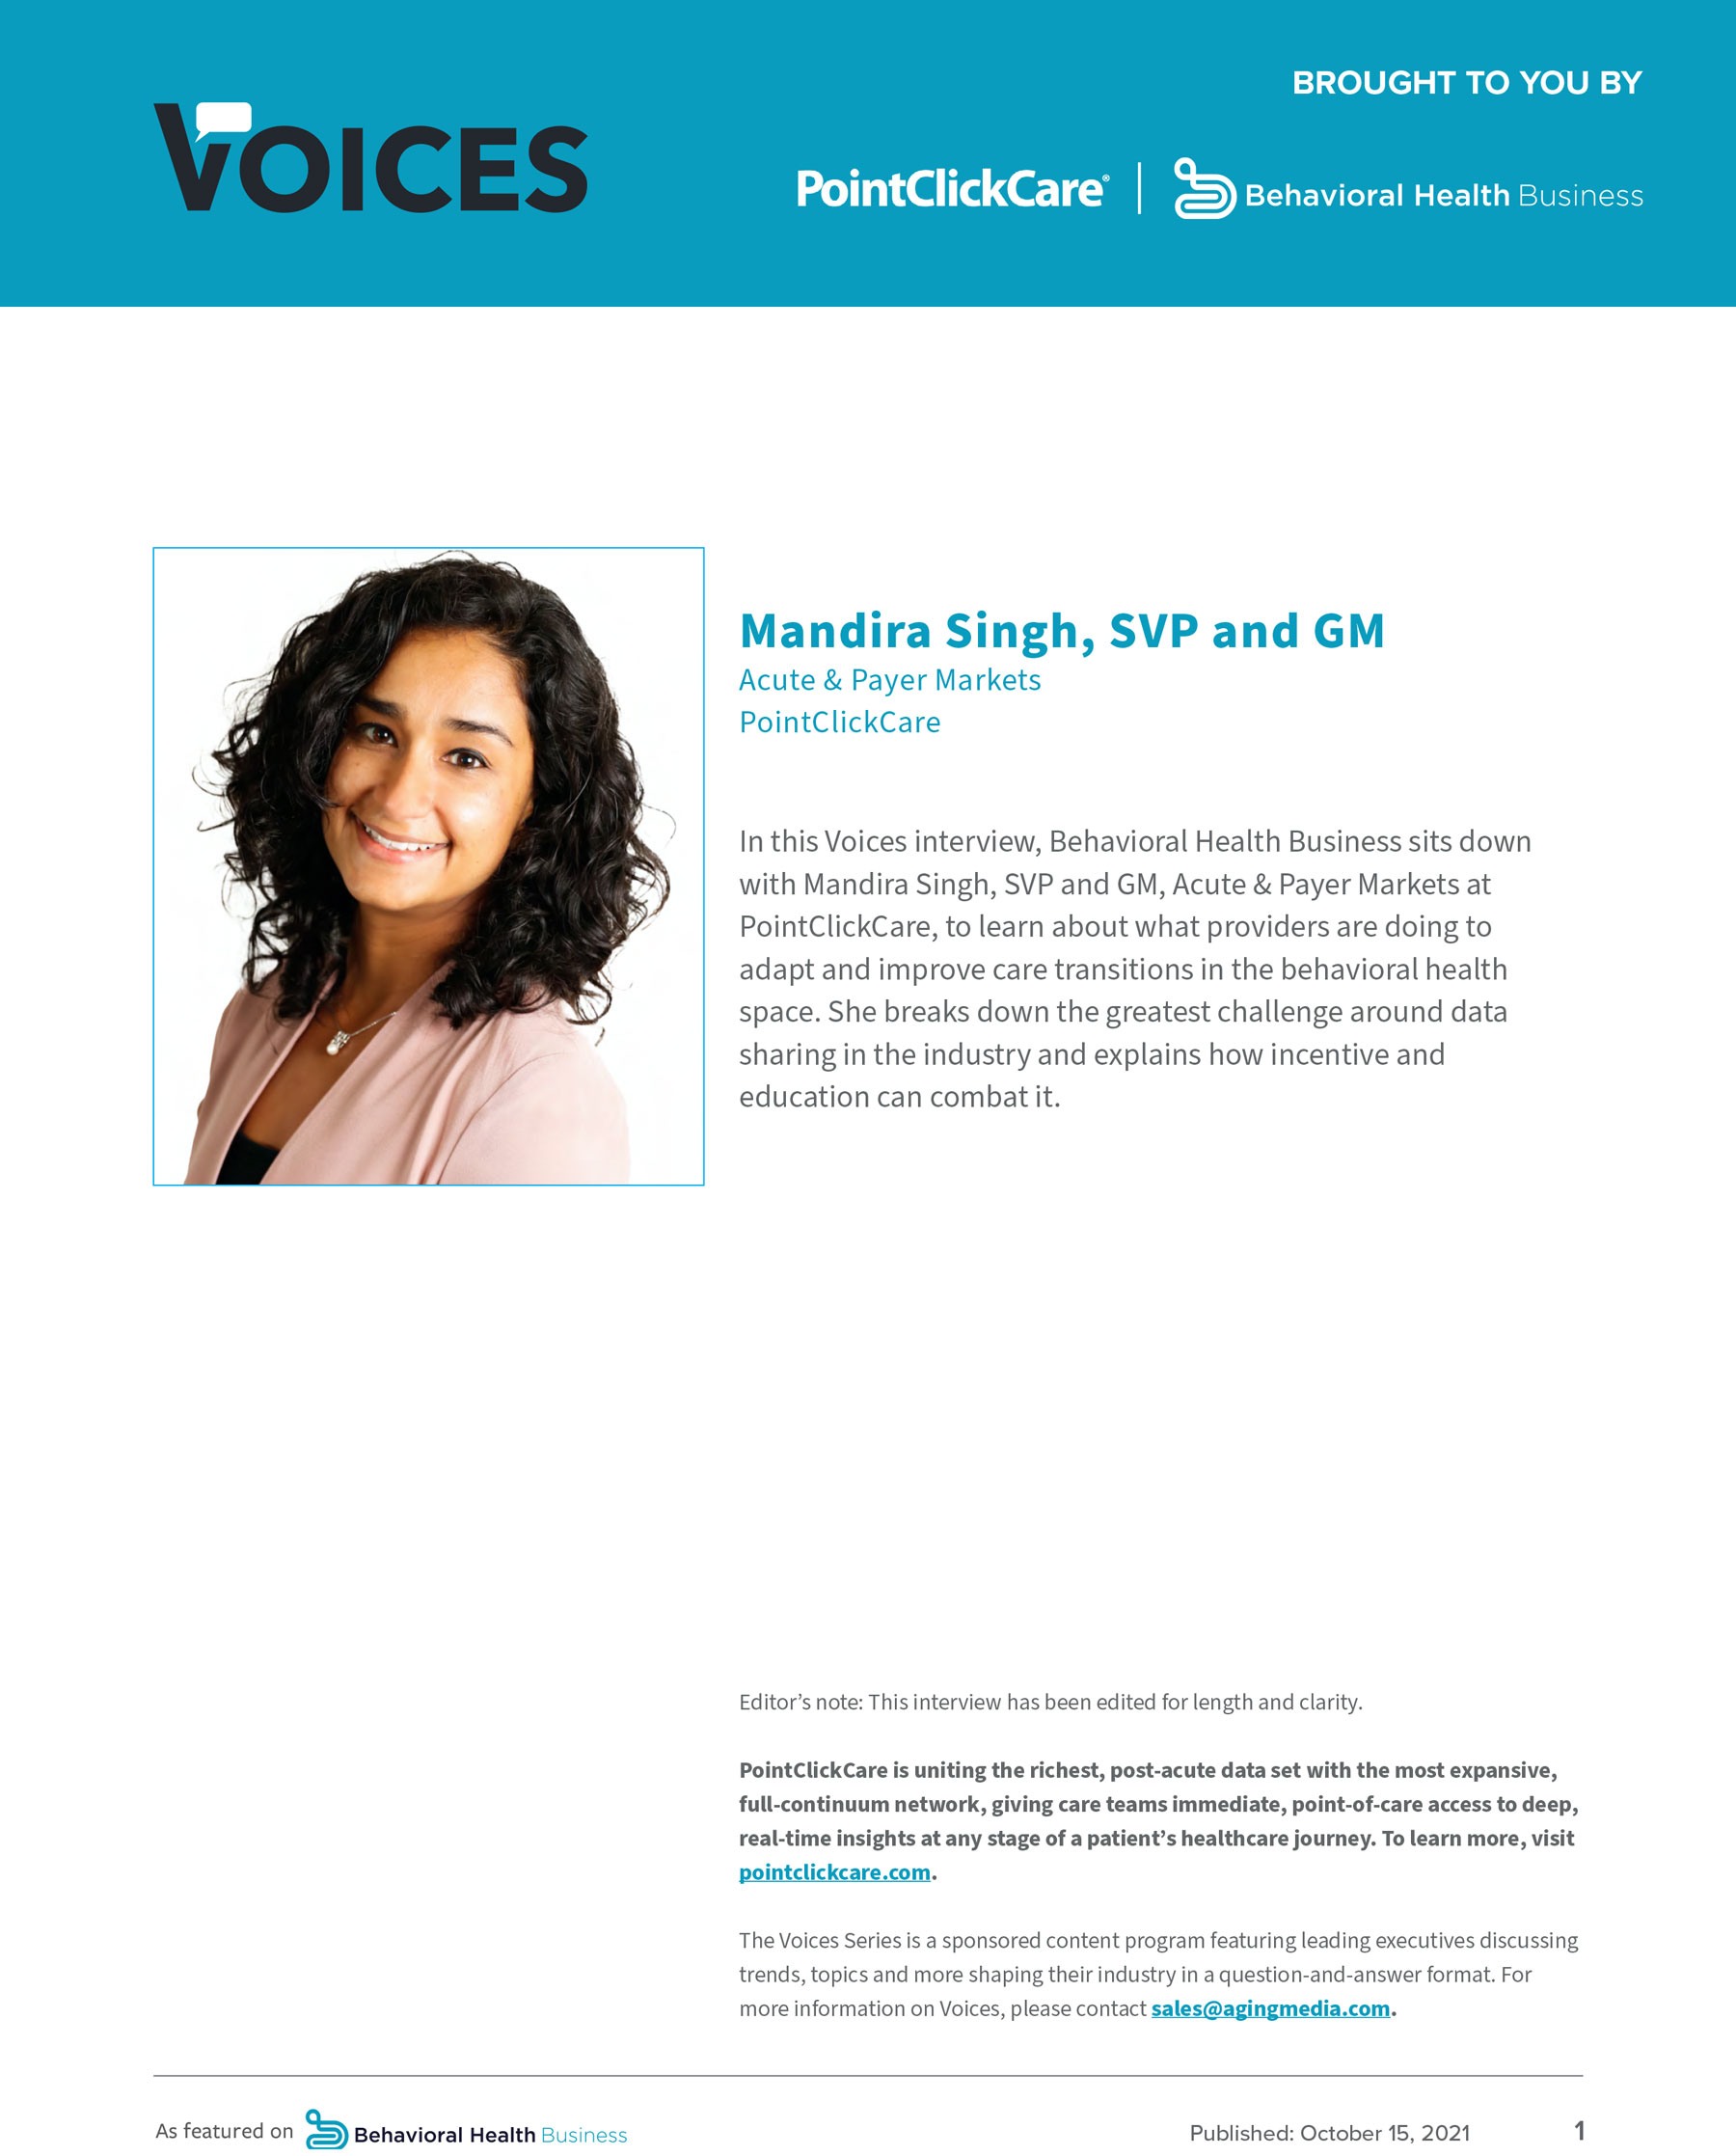 Behavioral Health Business Voices interview with Mandira Singh PDF cover page